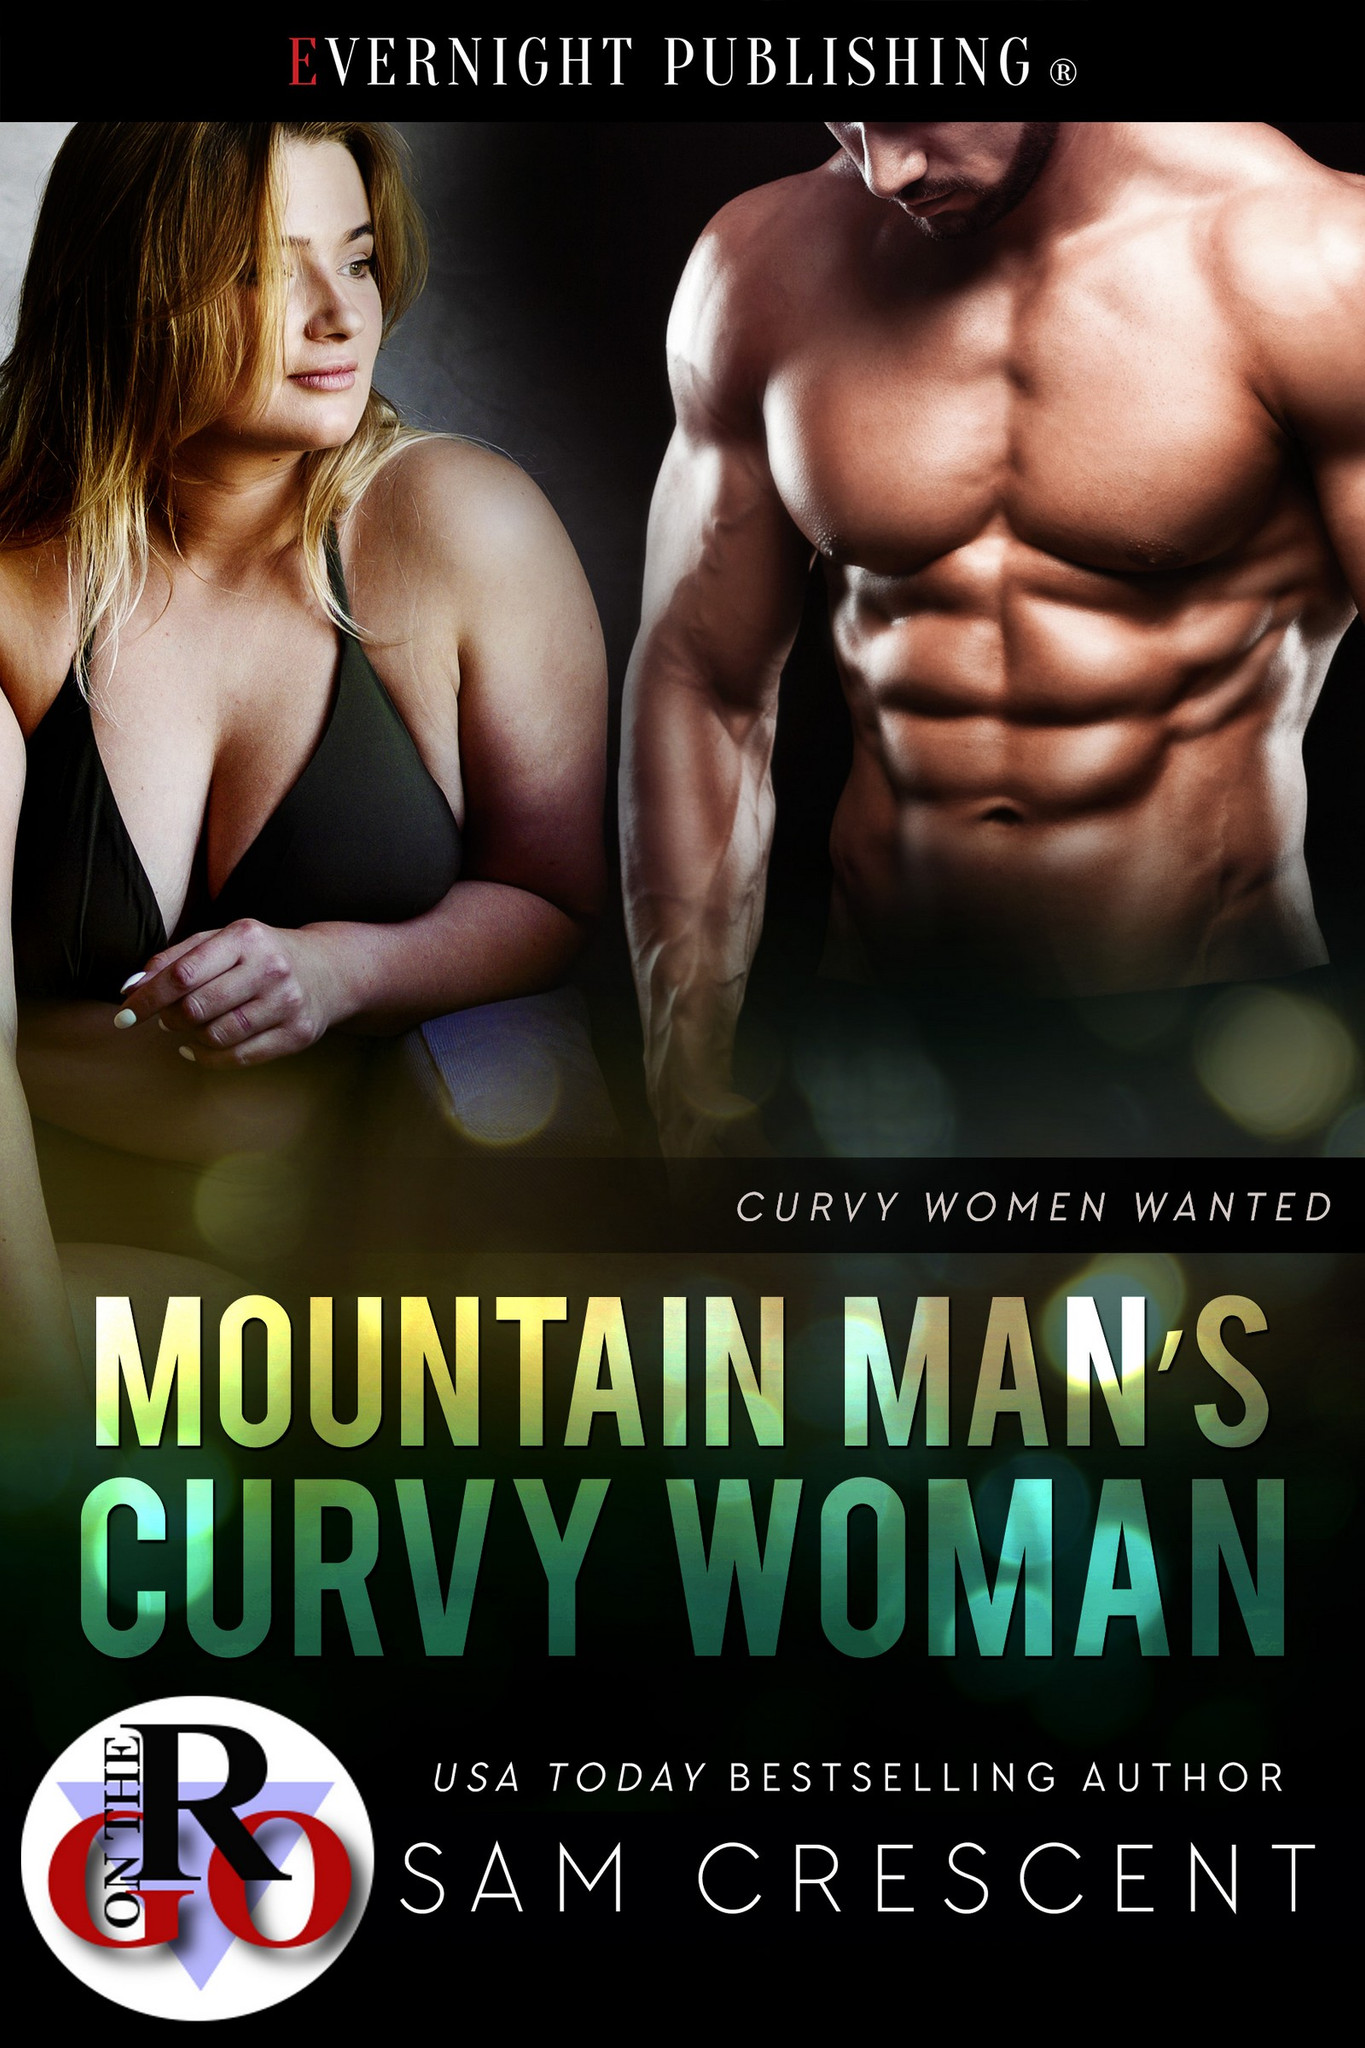 Mountain Mans Curvy Woman by Sam Crescent pic